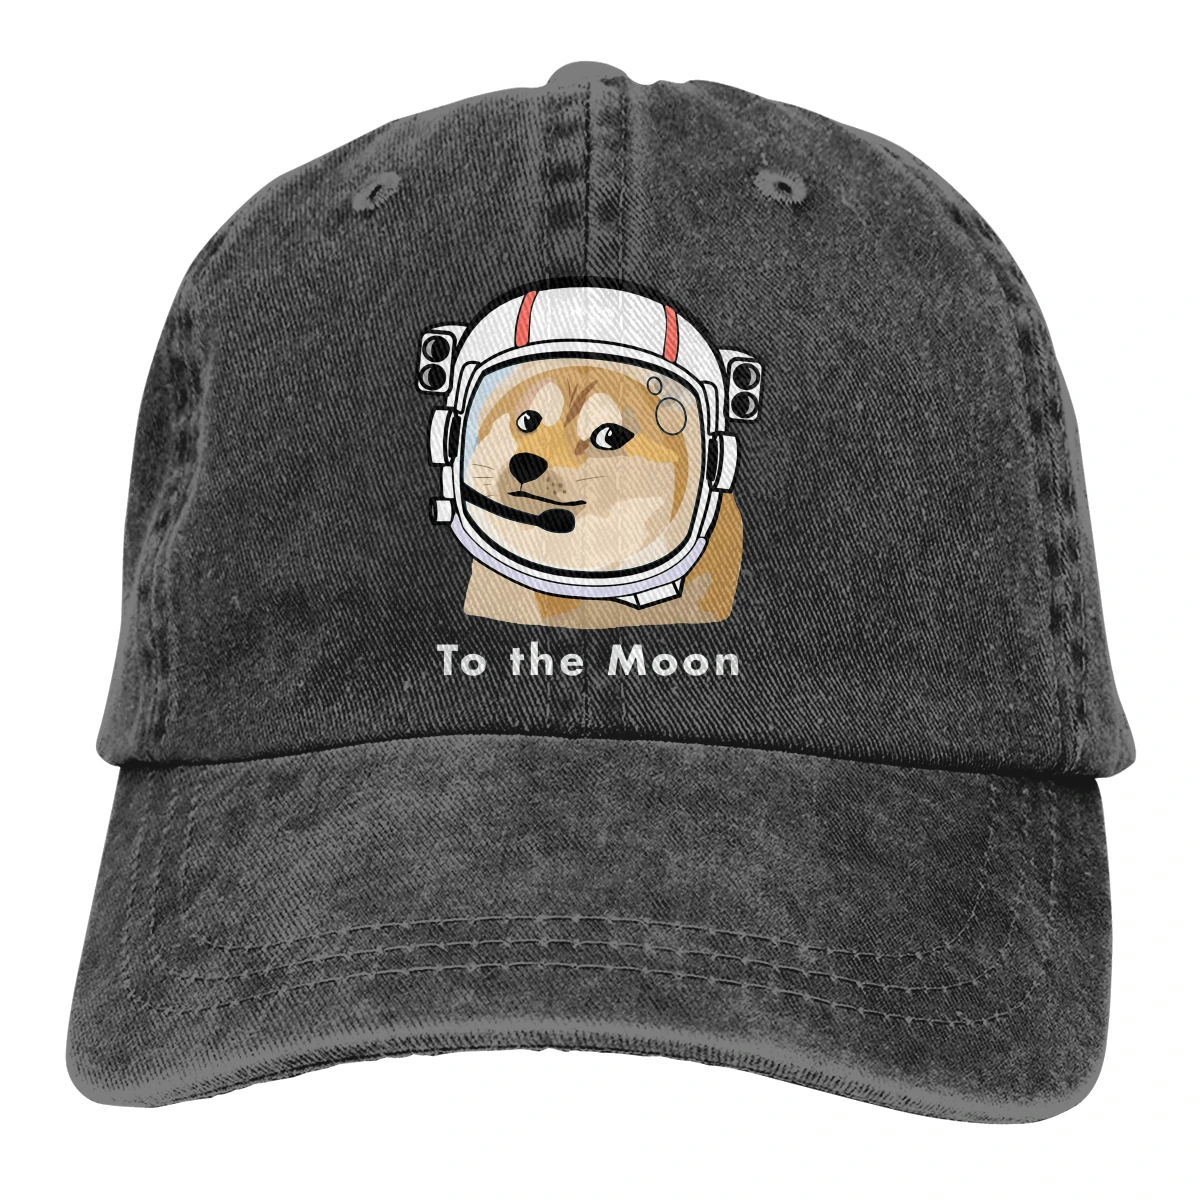 

2020 Best Selling Doge To The Moon The Baseball Cap Peaked capt Sport Unisex Outdoor Custom Dogecoin Funny Bitcoin Hats